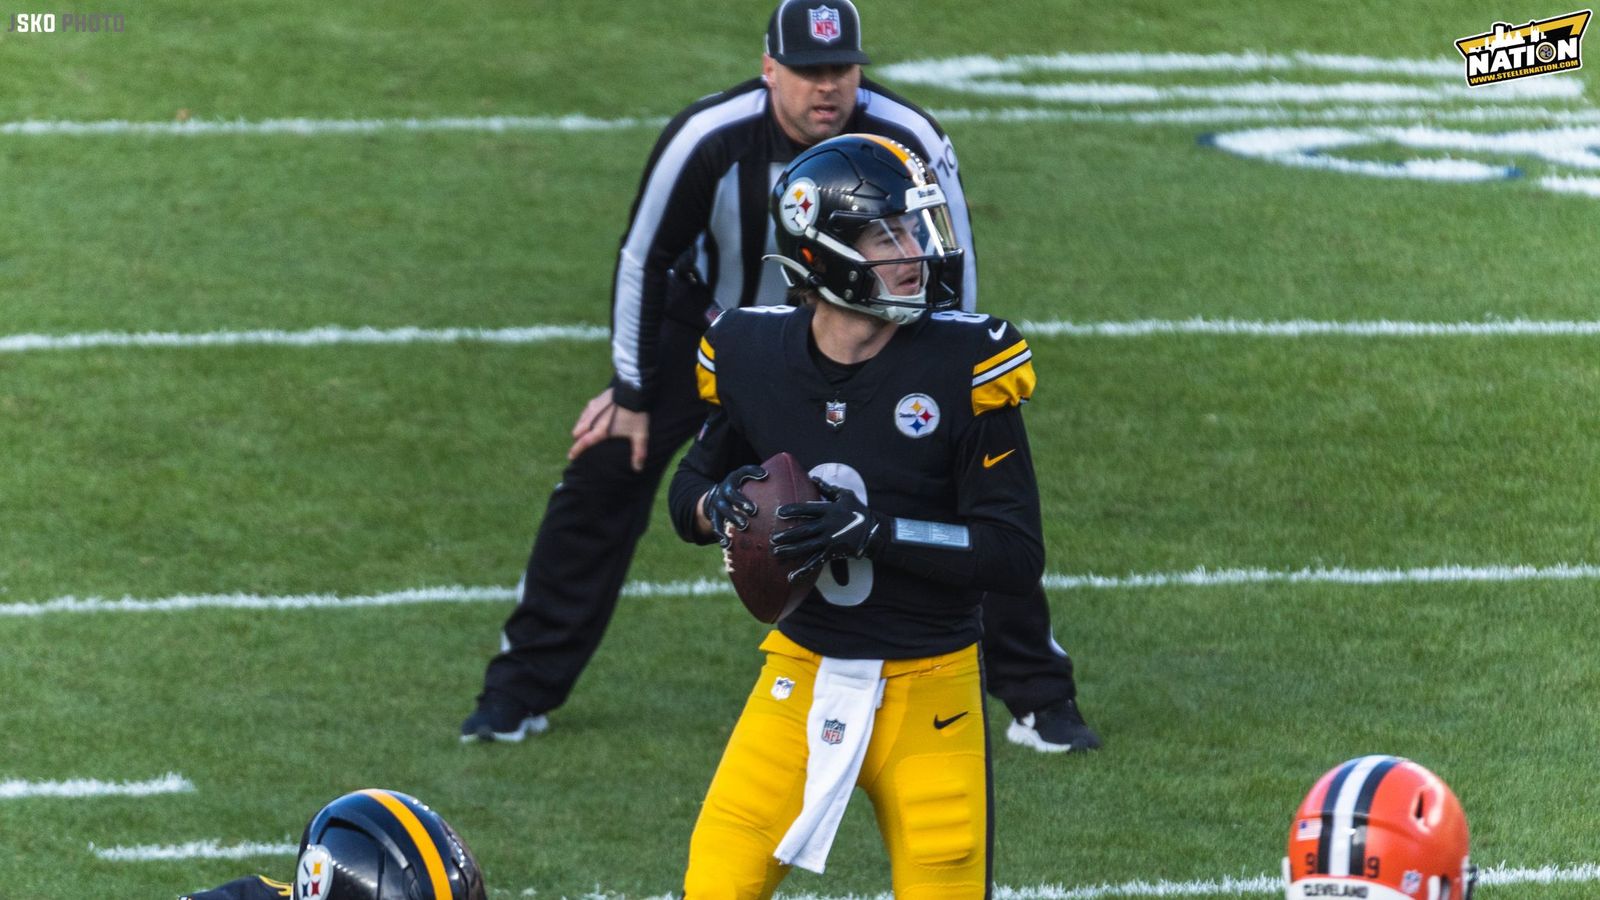 The weeks change. The opponents change. The Steelers' inability to generate  points does not